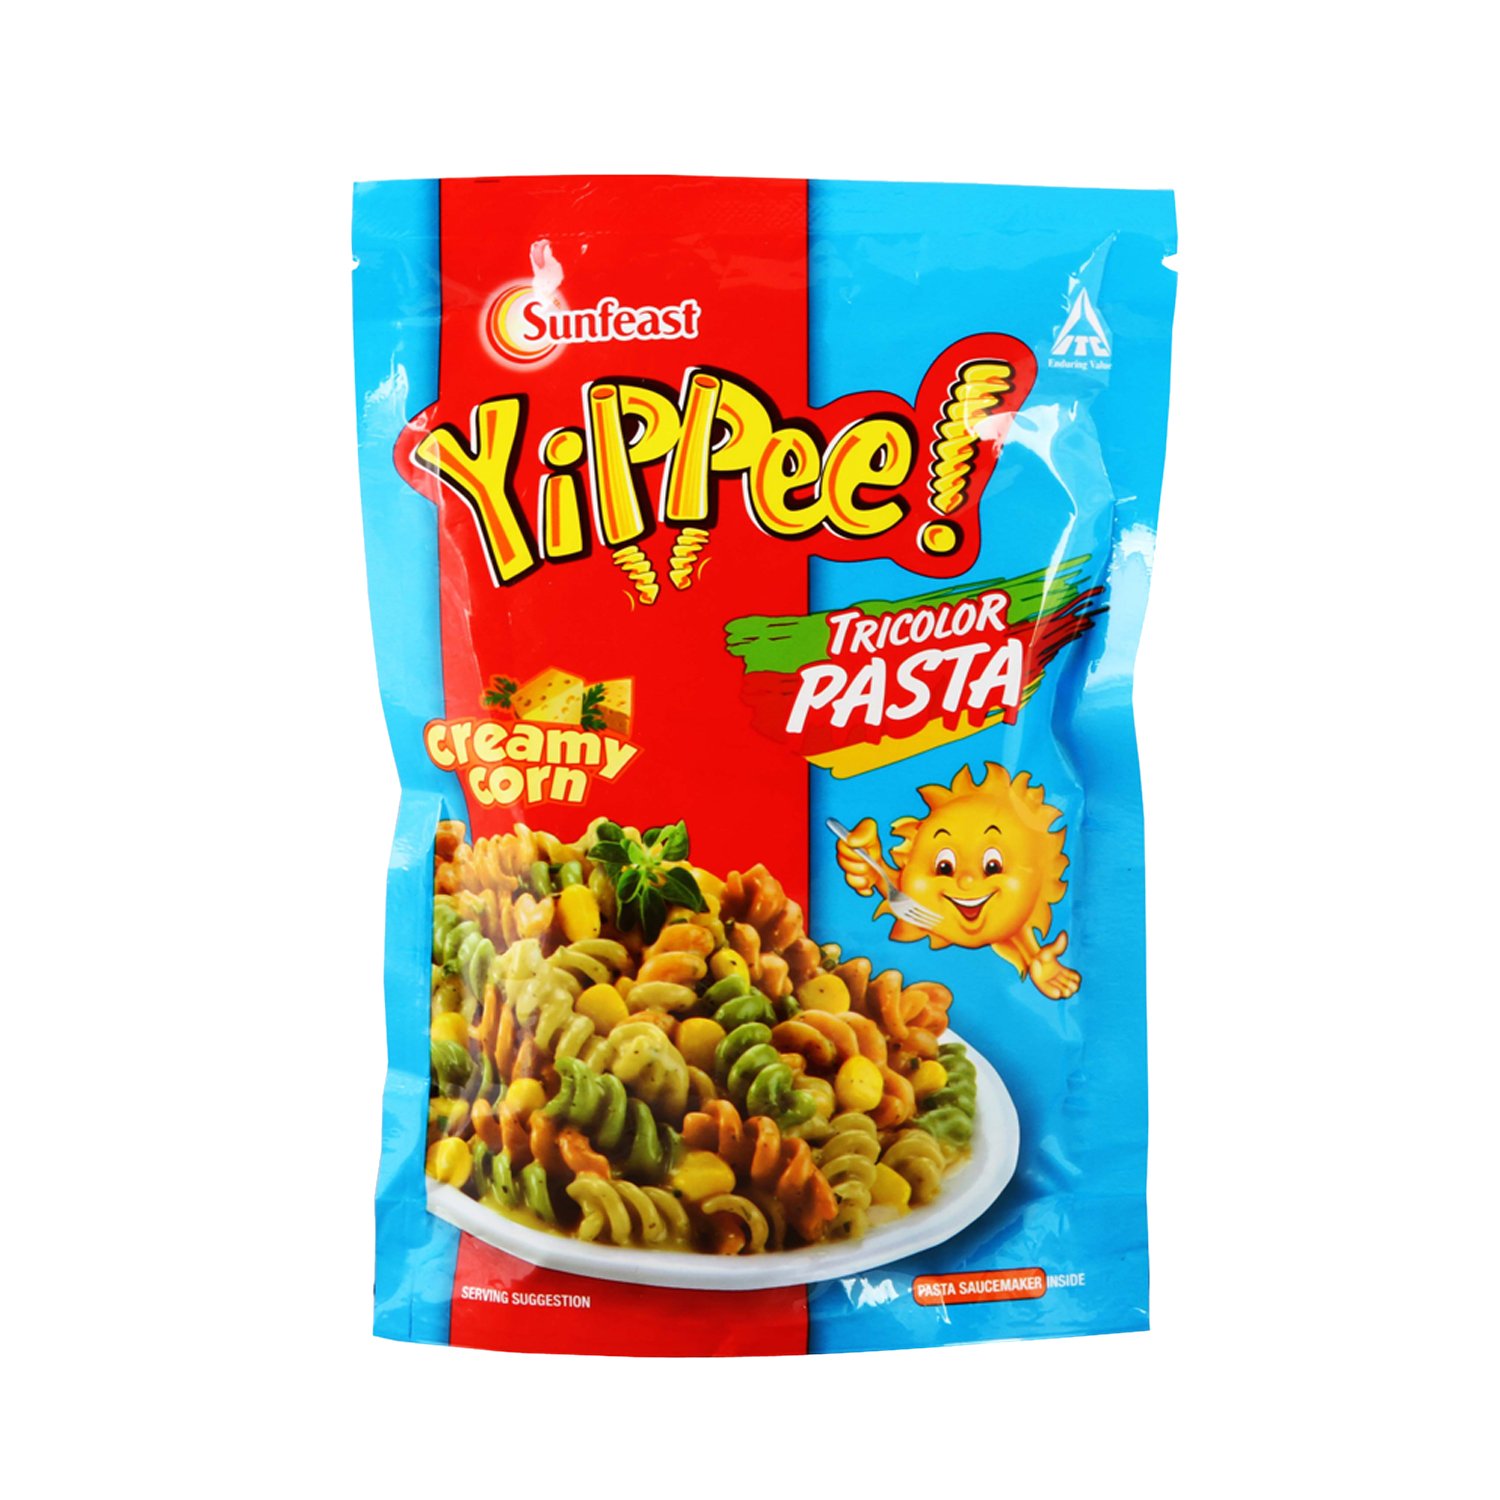 Sunfeast YiPPee Tricolor Pasta Masala 65g Pack